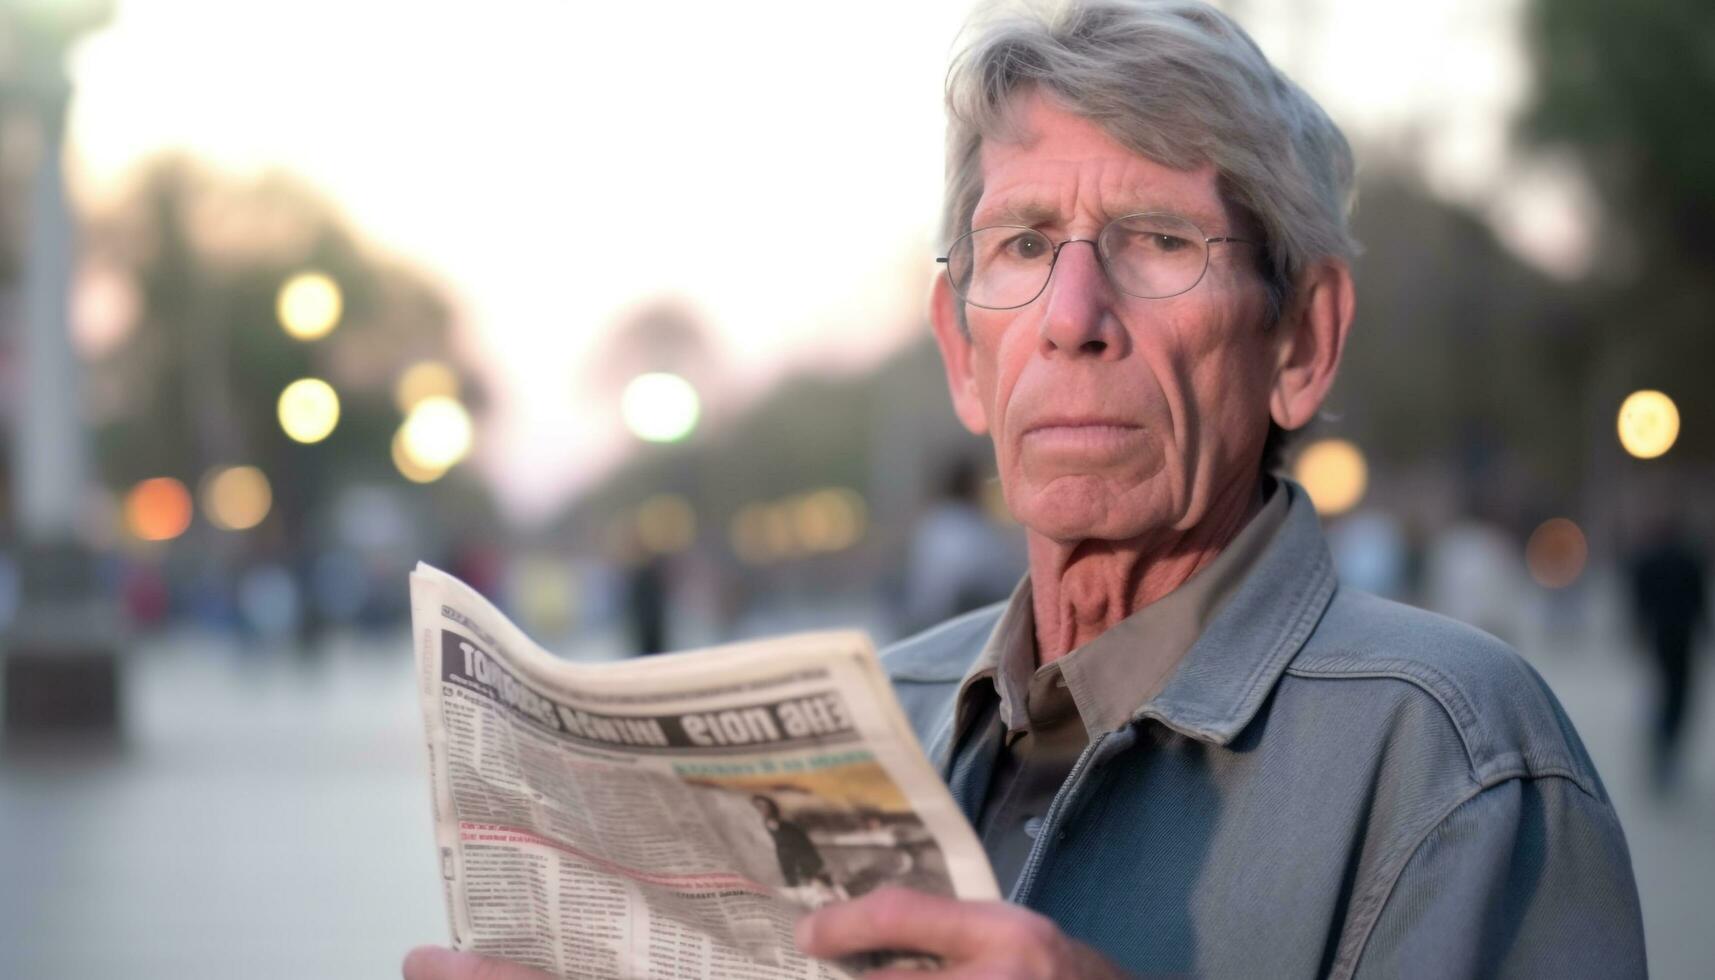 Senior man reading newspaper outdoors, wearing eyeglasses and smiling generated by AI photo